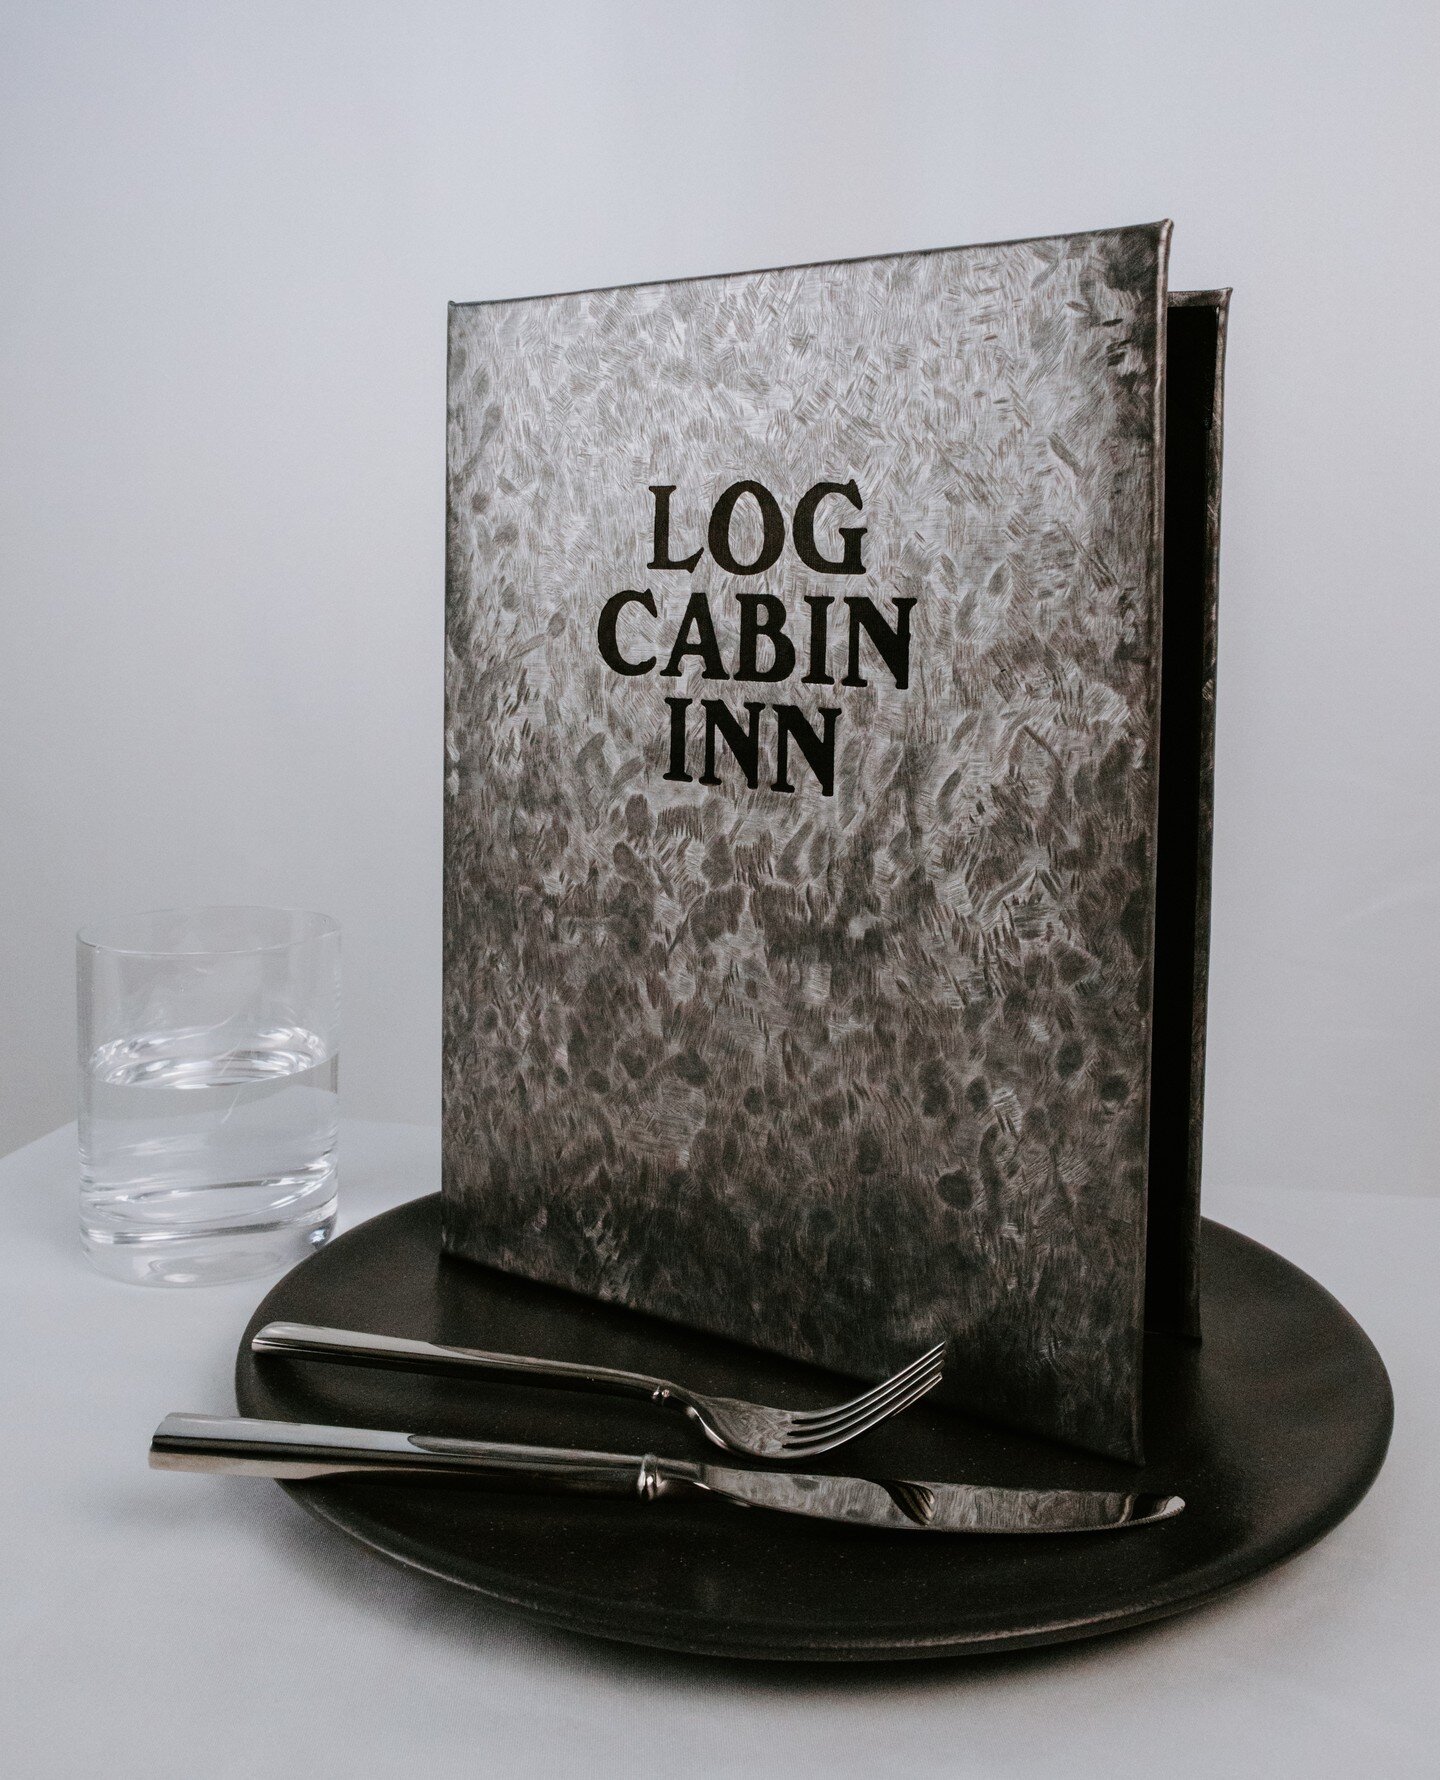 Make your contemporary, modern restaurant stand out with our stylish and durable Brushed Metallic menu covers. They help create a sophisticated and industrial look that will take your business to the next level. The surface features a speckled, scrat